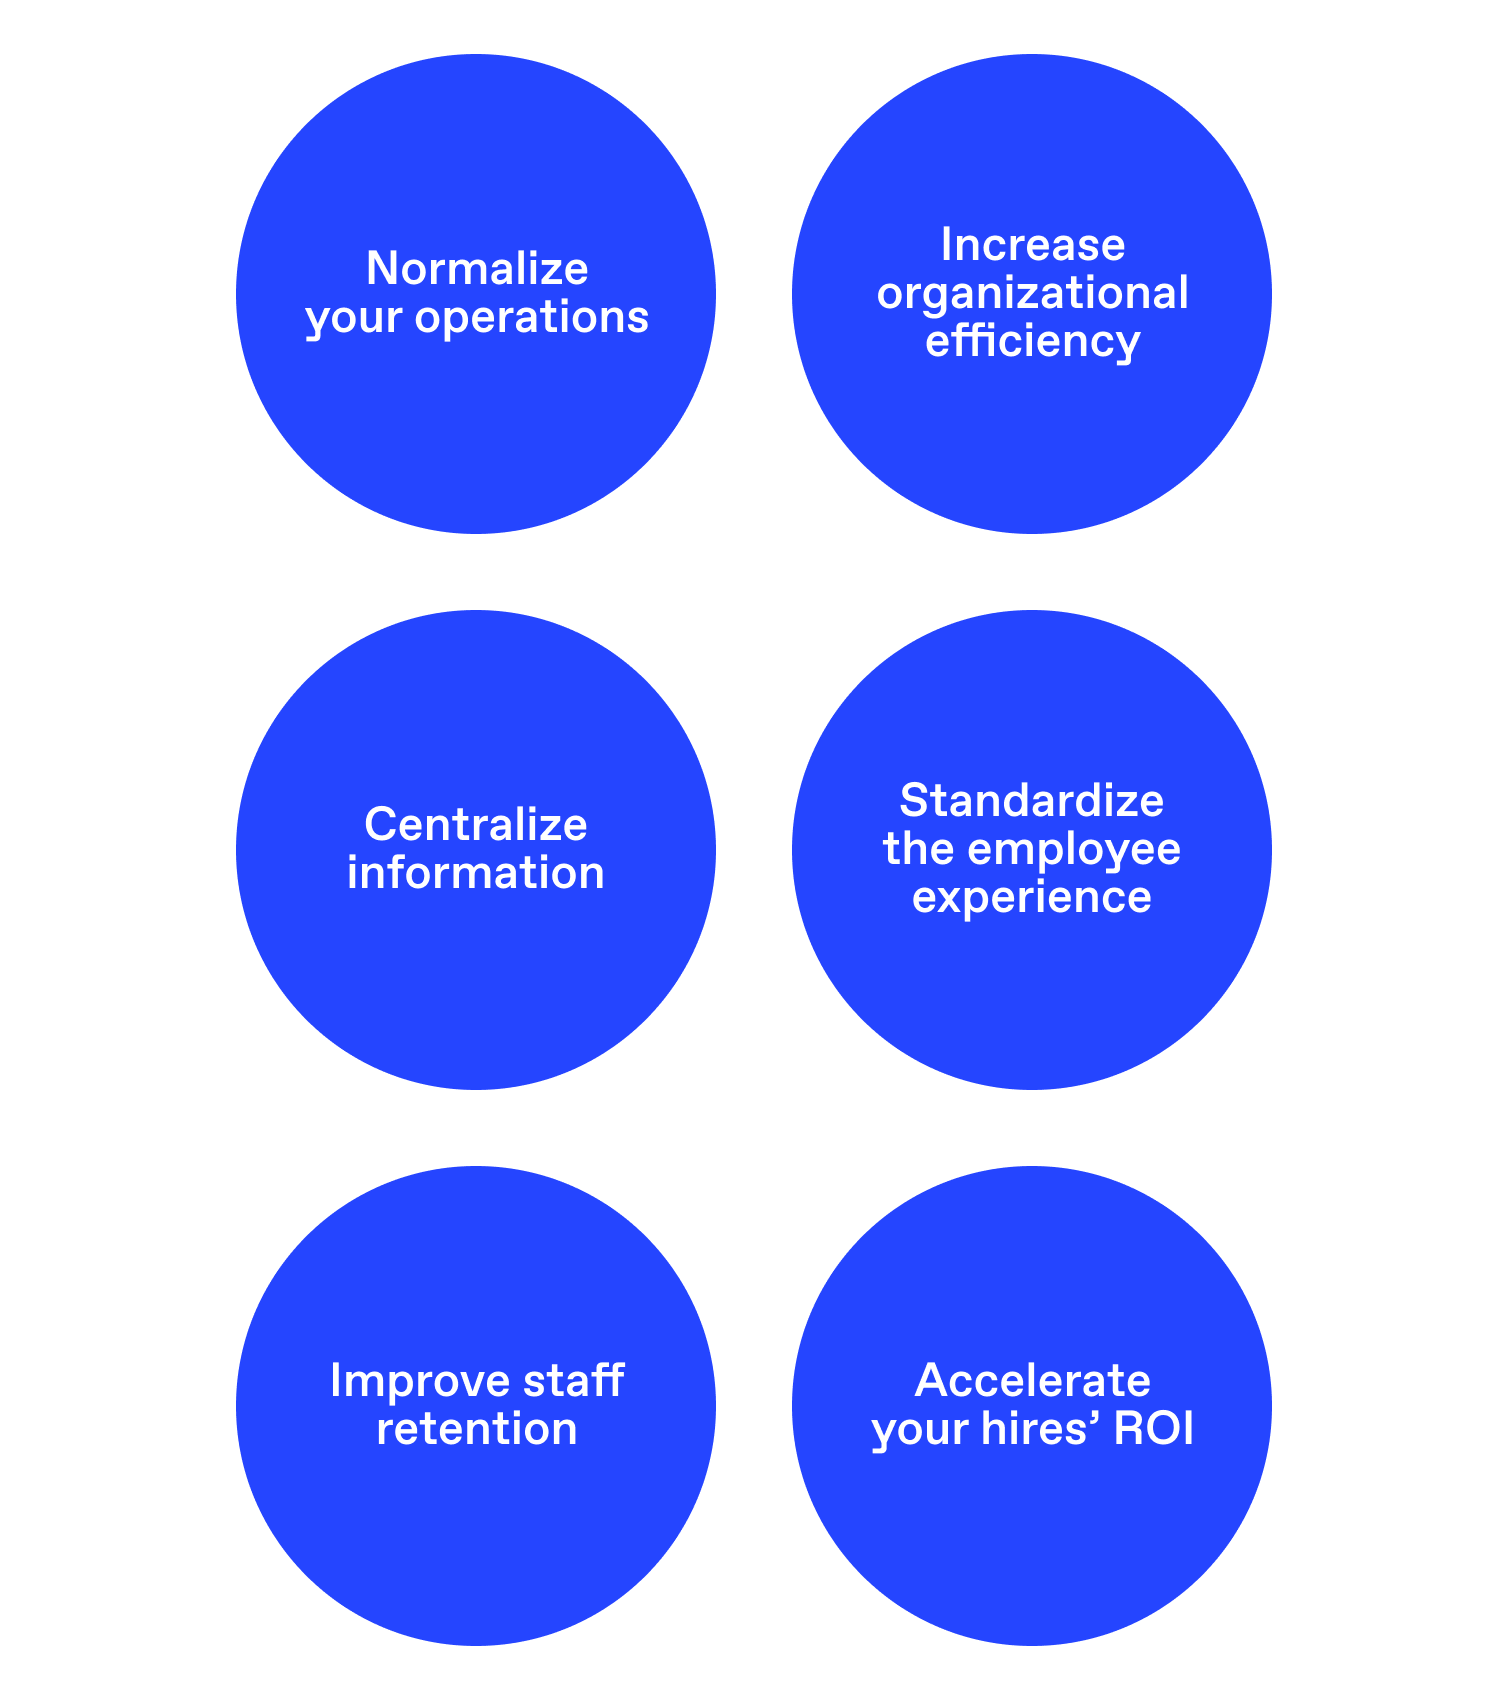 List of benefits of implementing your integration process.